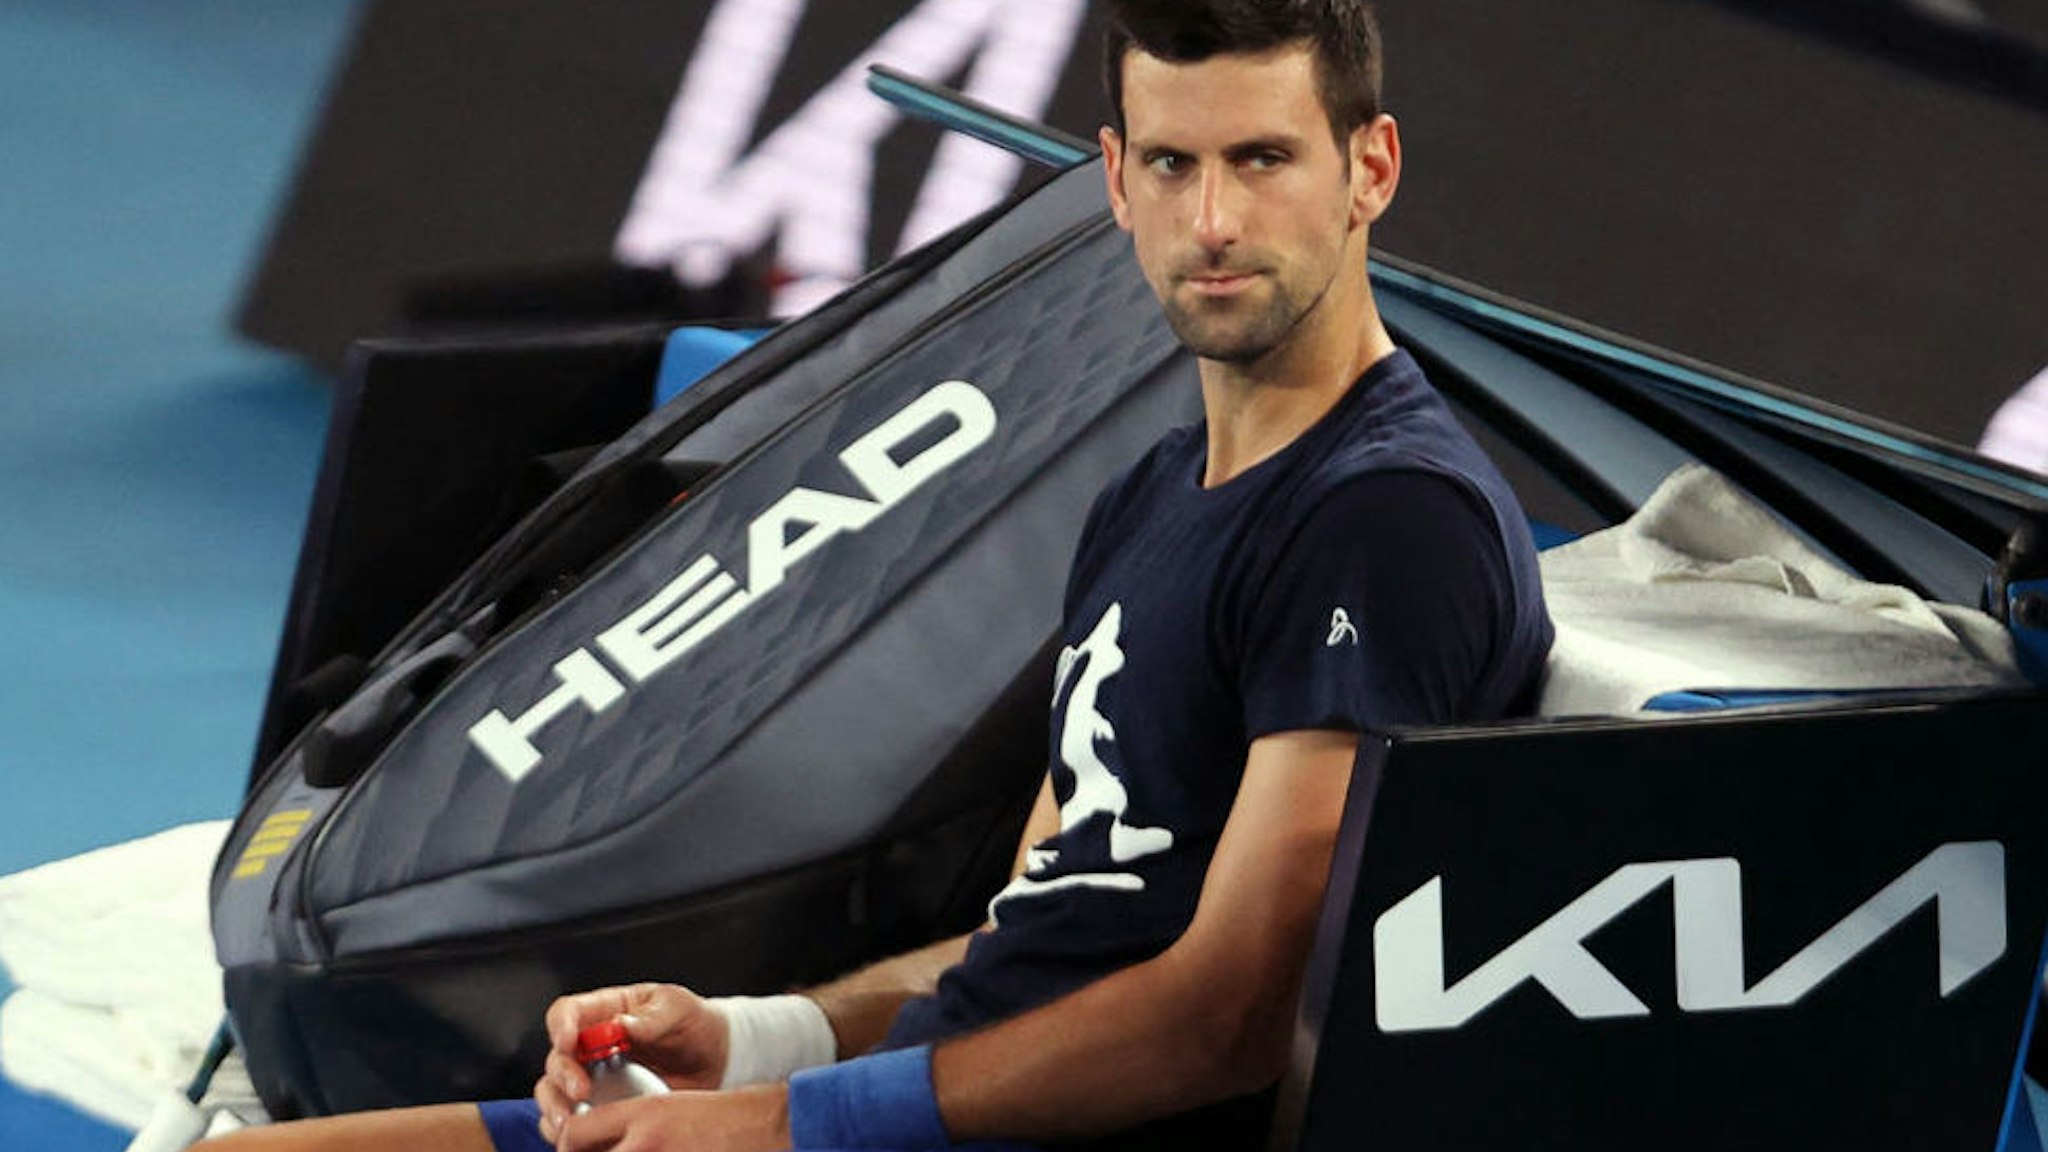 Novak Djokovic of Serbia attends a practice session ahead of the Australian Open tennis tournament in Melbourne on January 14, 2022.